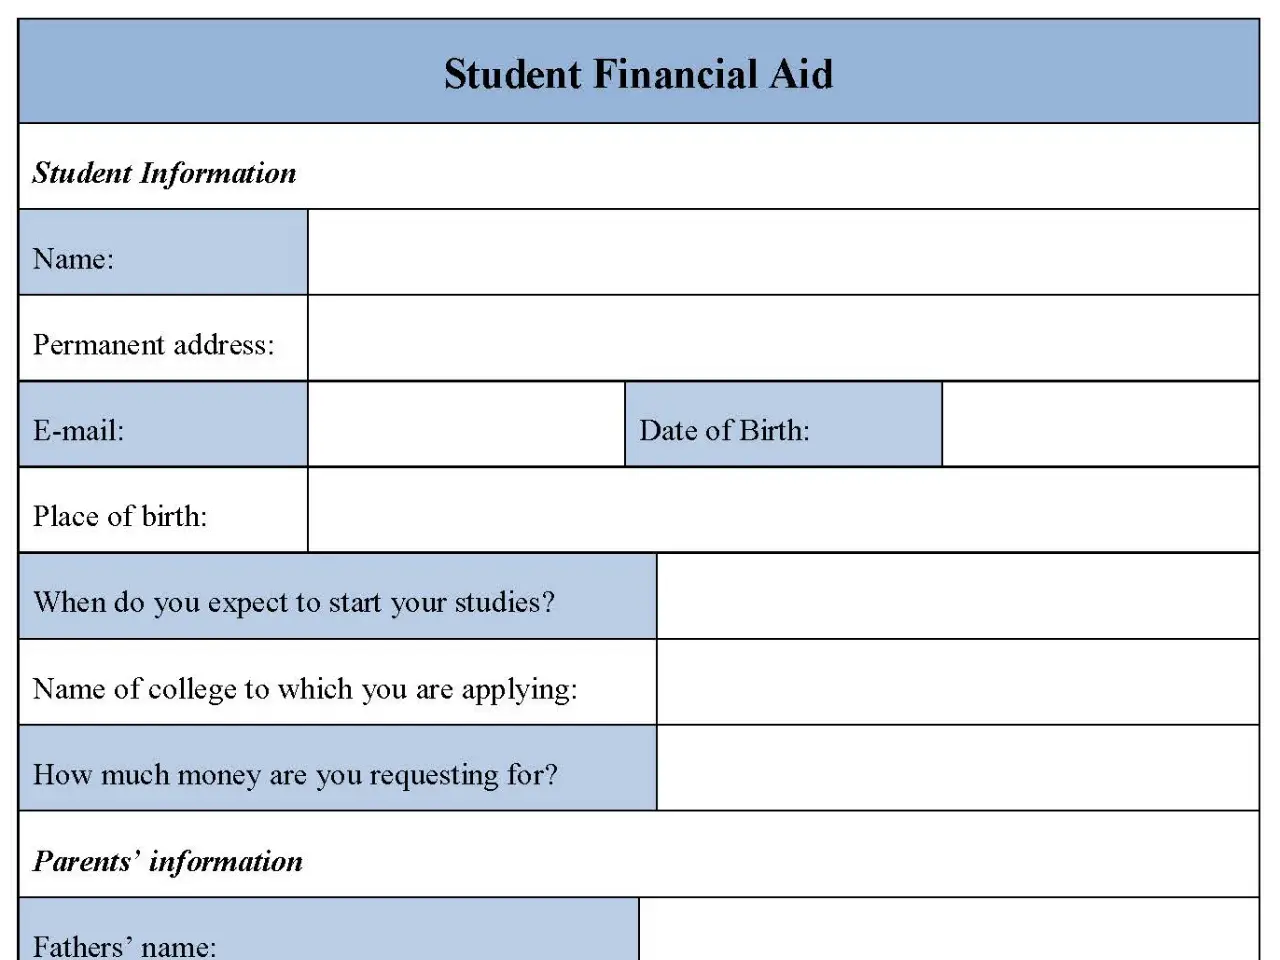 Student Financial aid form